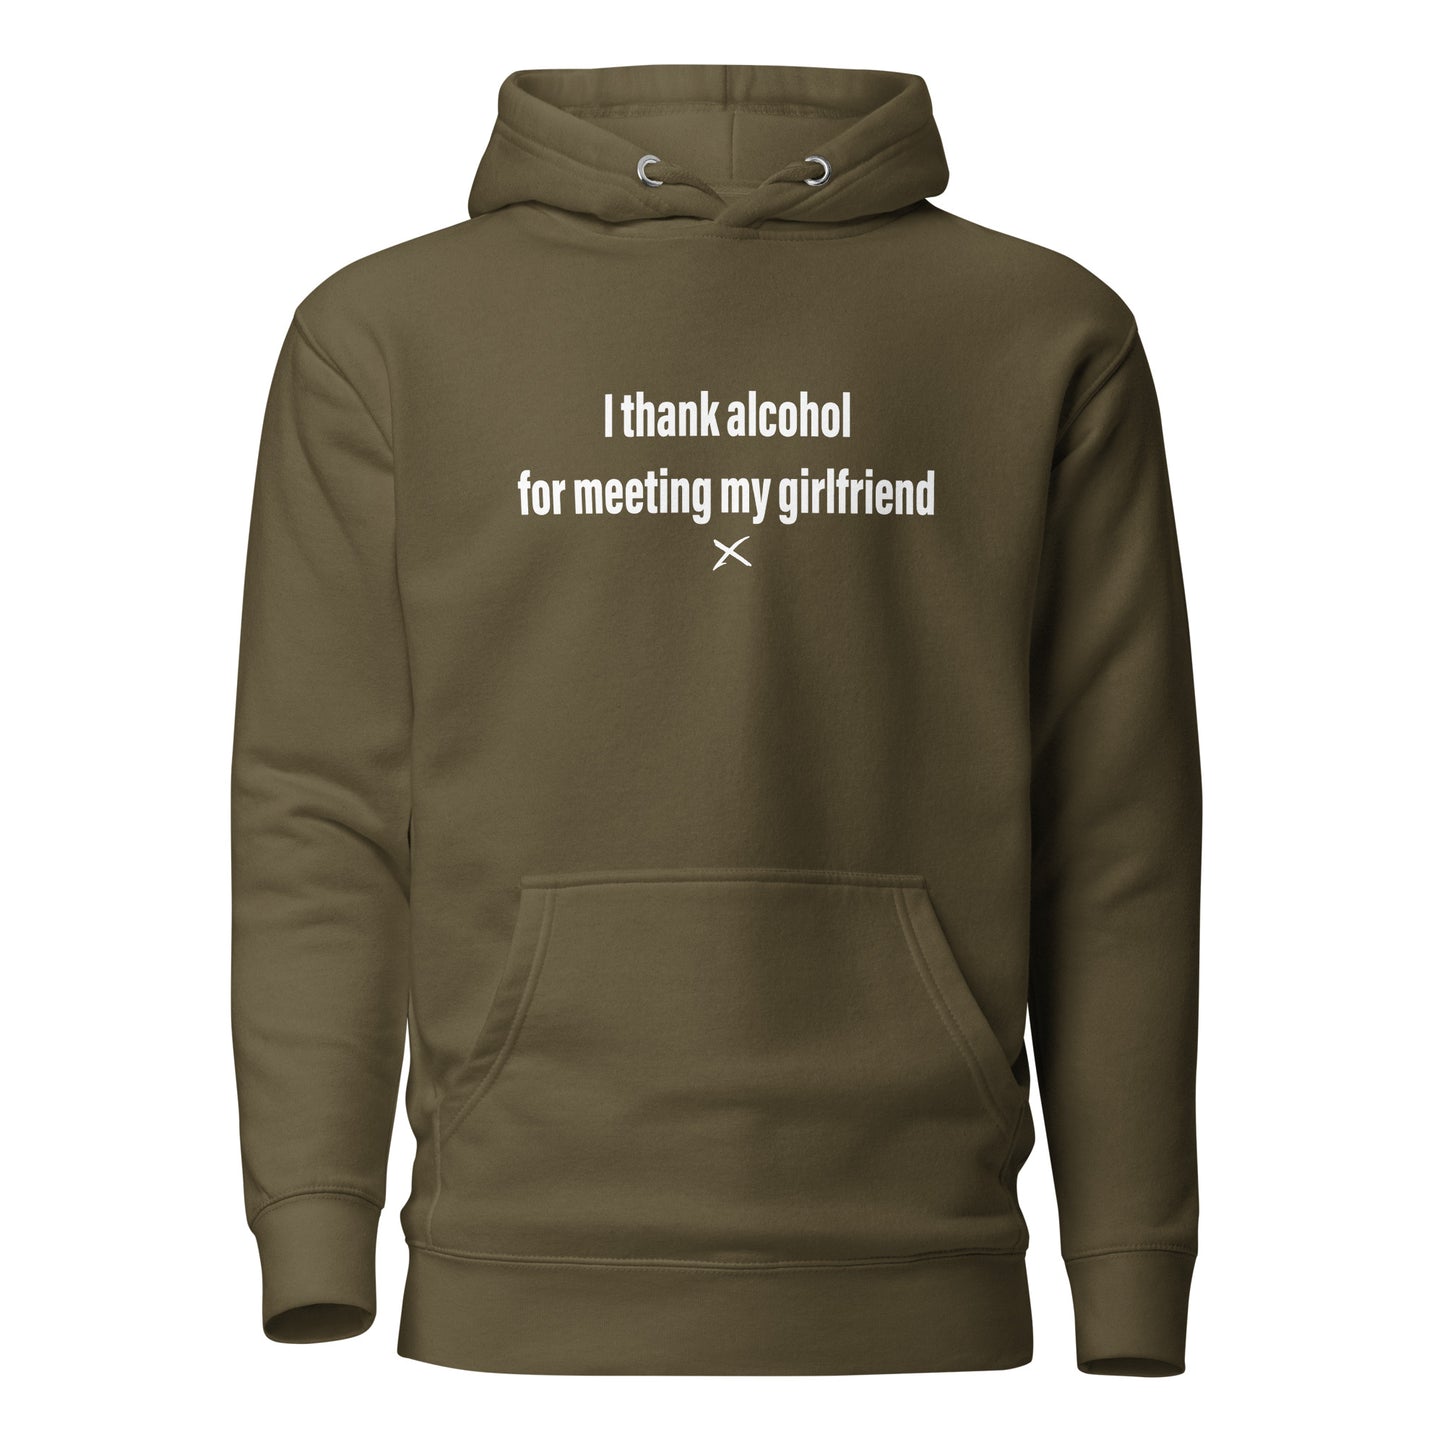 I thank alcohol for meeting my girlfriend - Hoodie